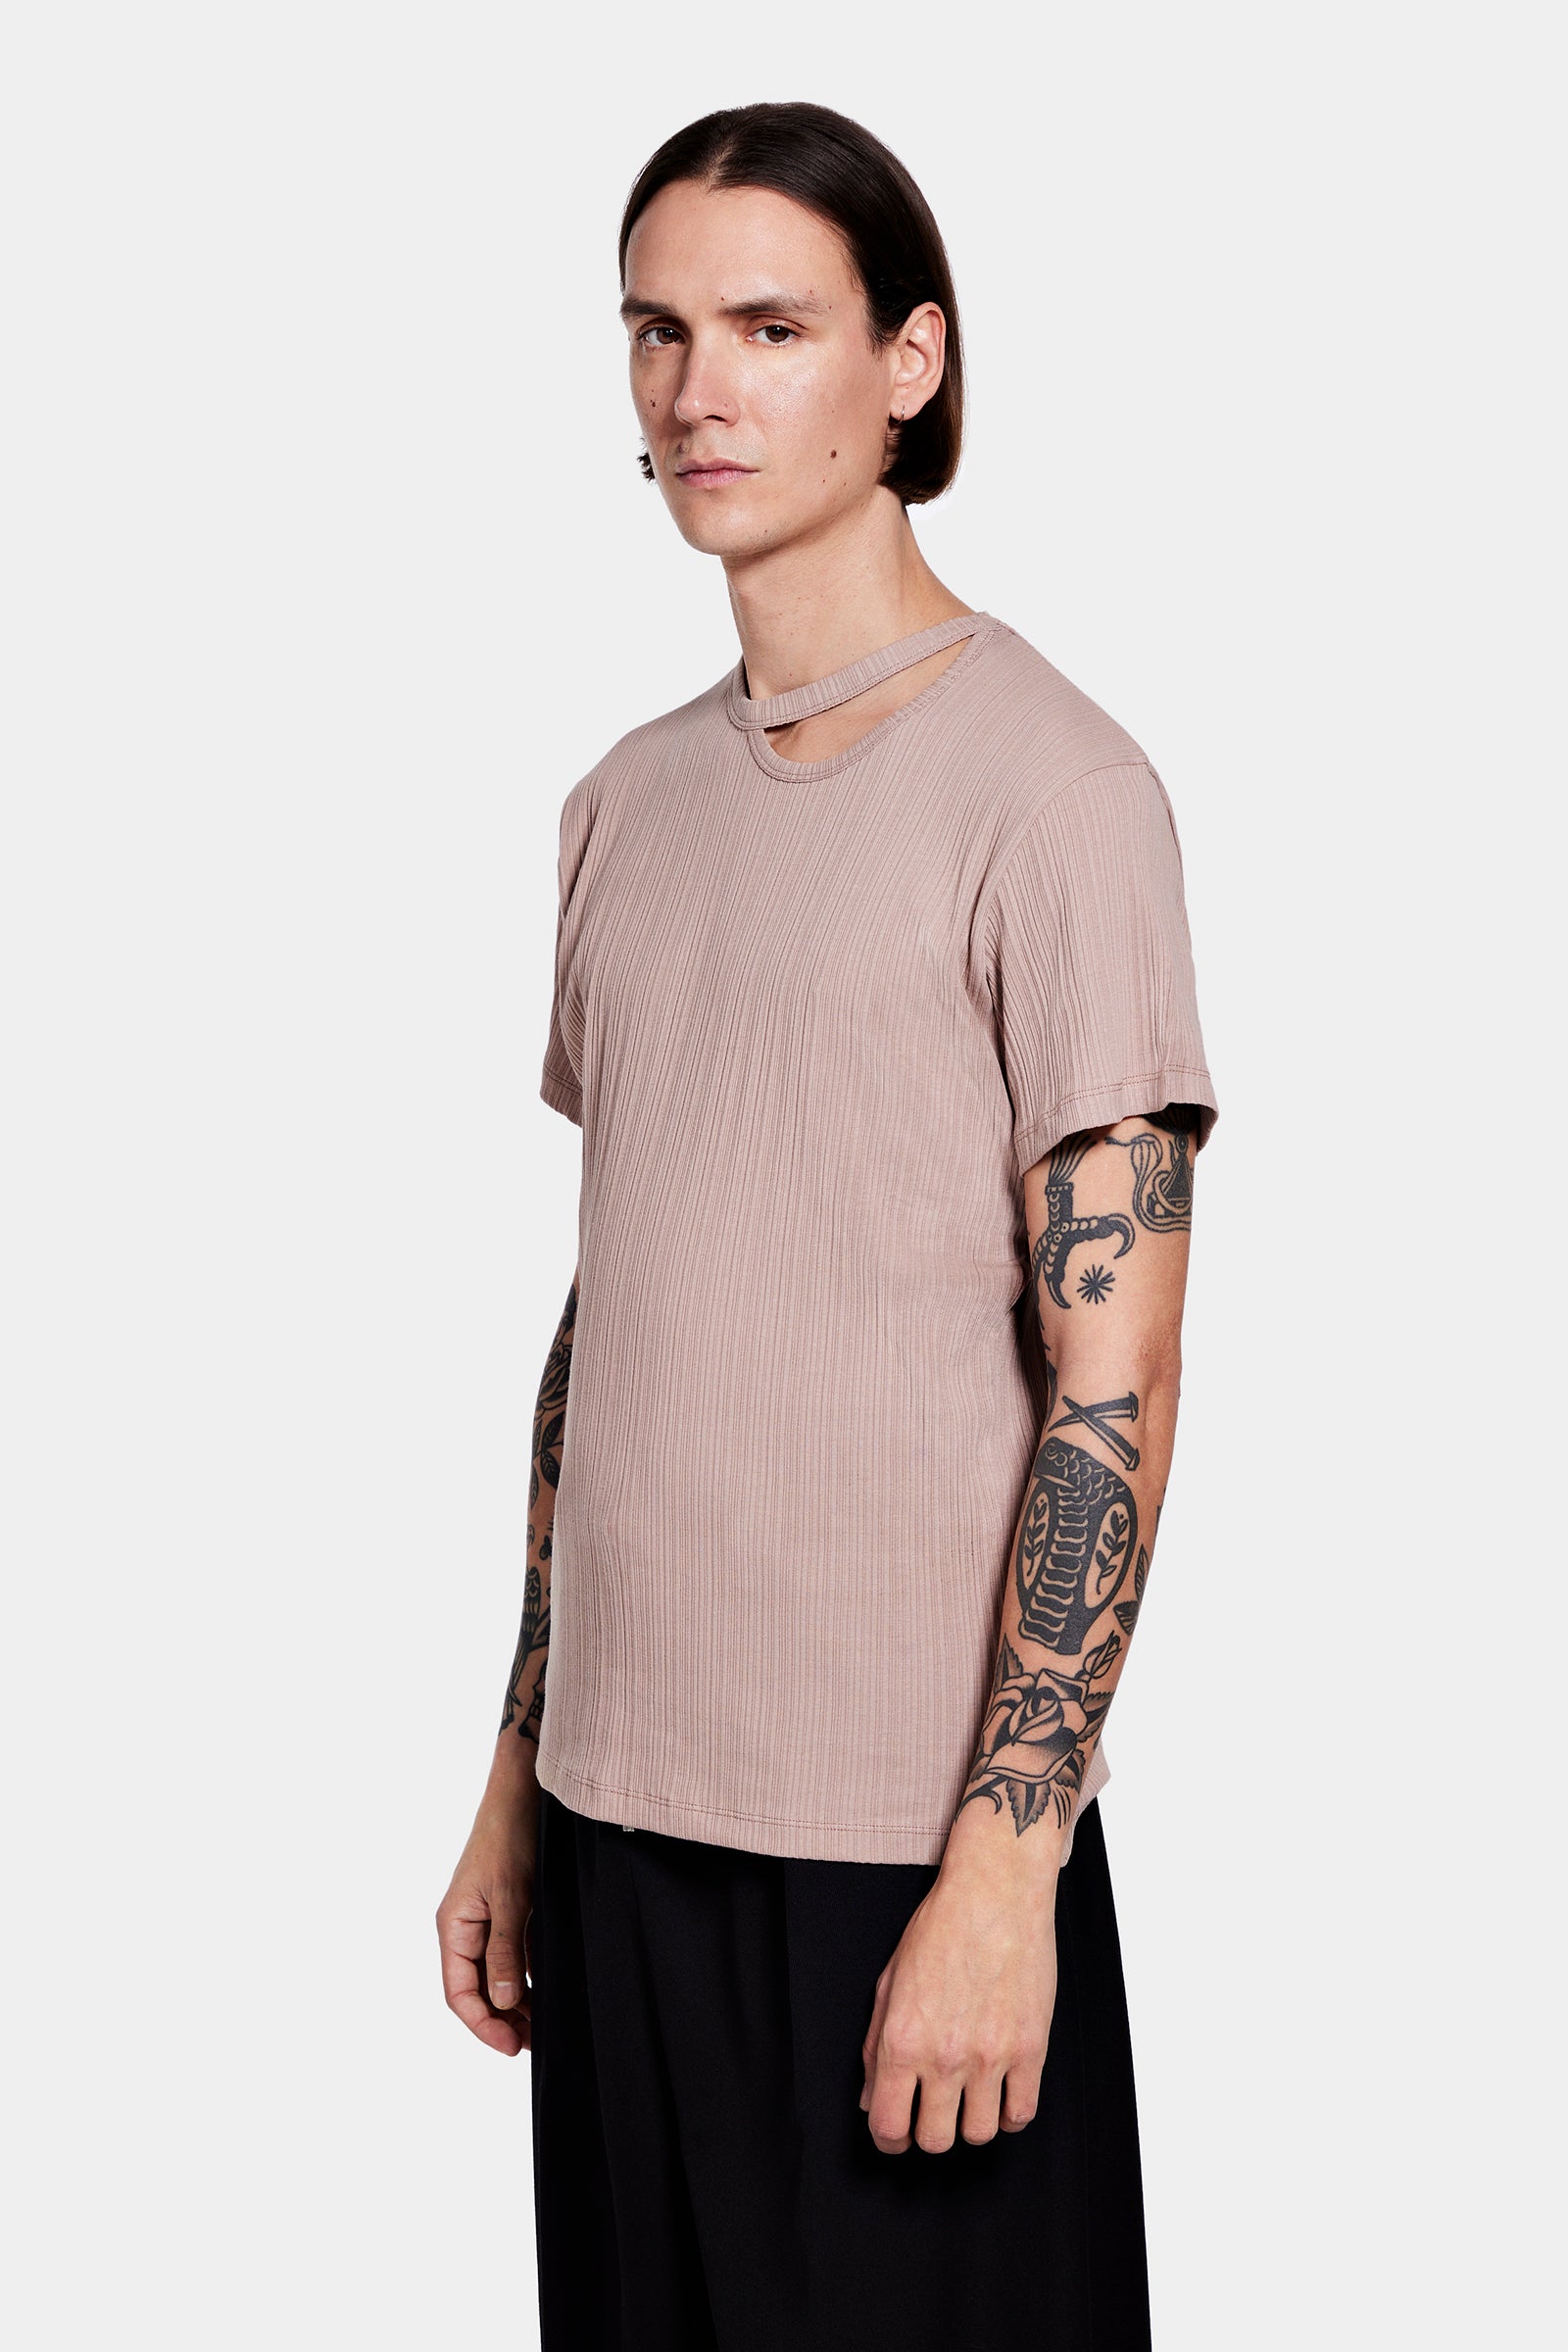 T-SHIRT WITH ASYMMETRICAL OPENING